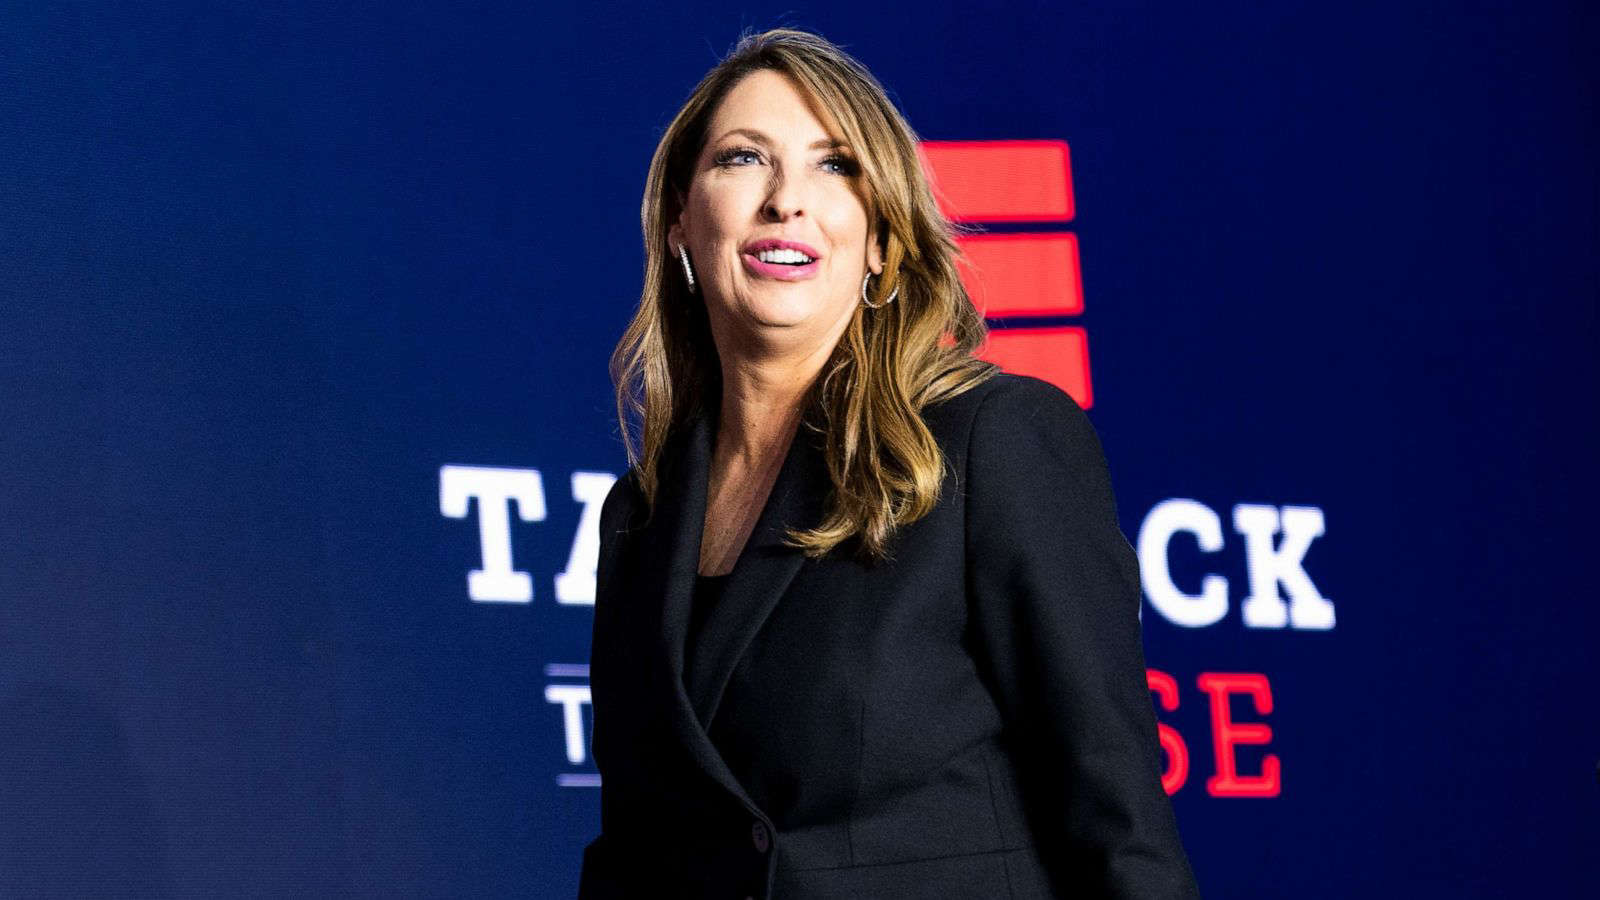 Ronna McDaniel reelected RNC chair after contentious 3-way contest over GOP's future